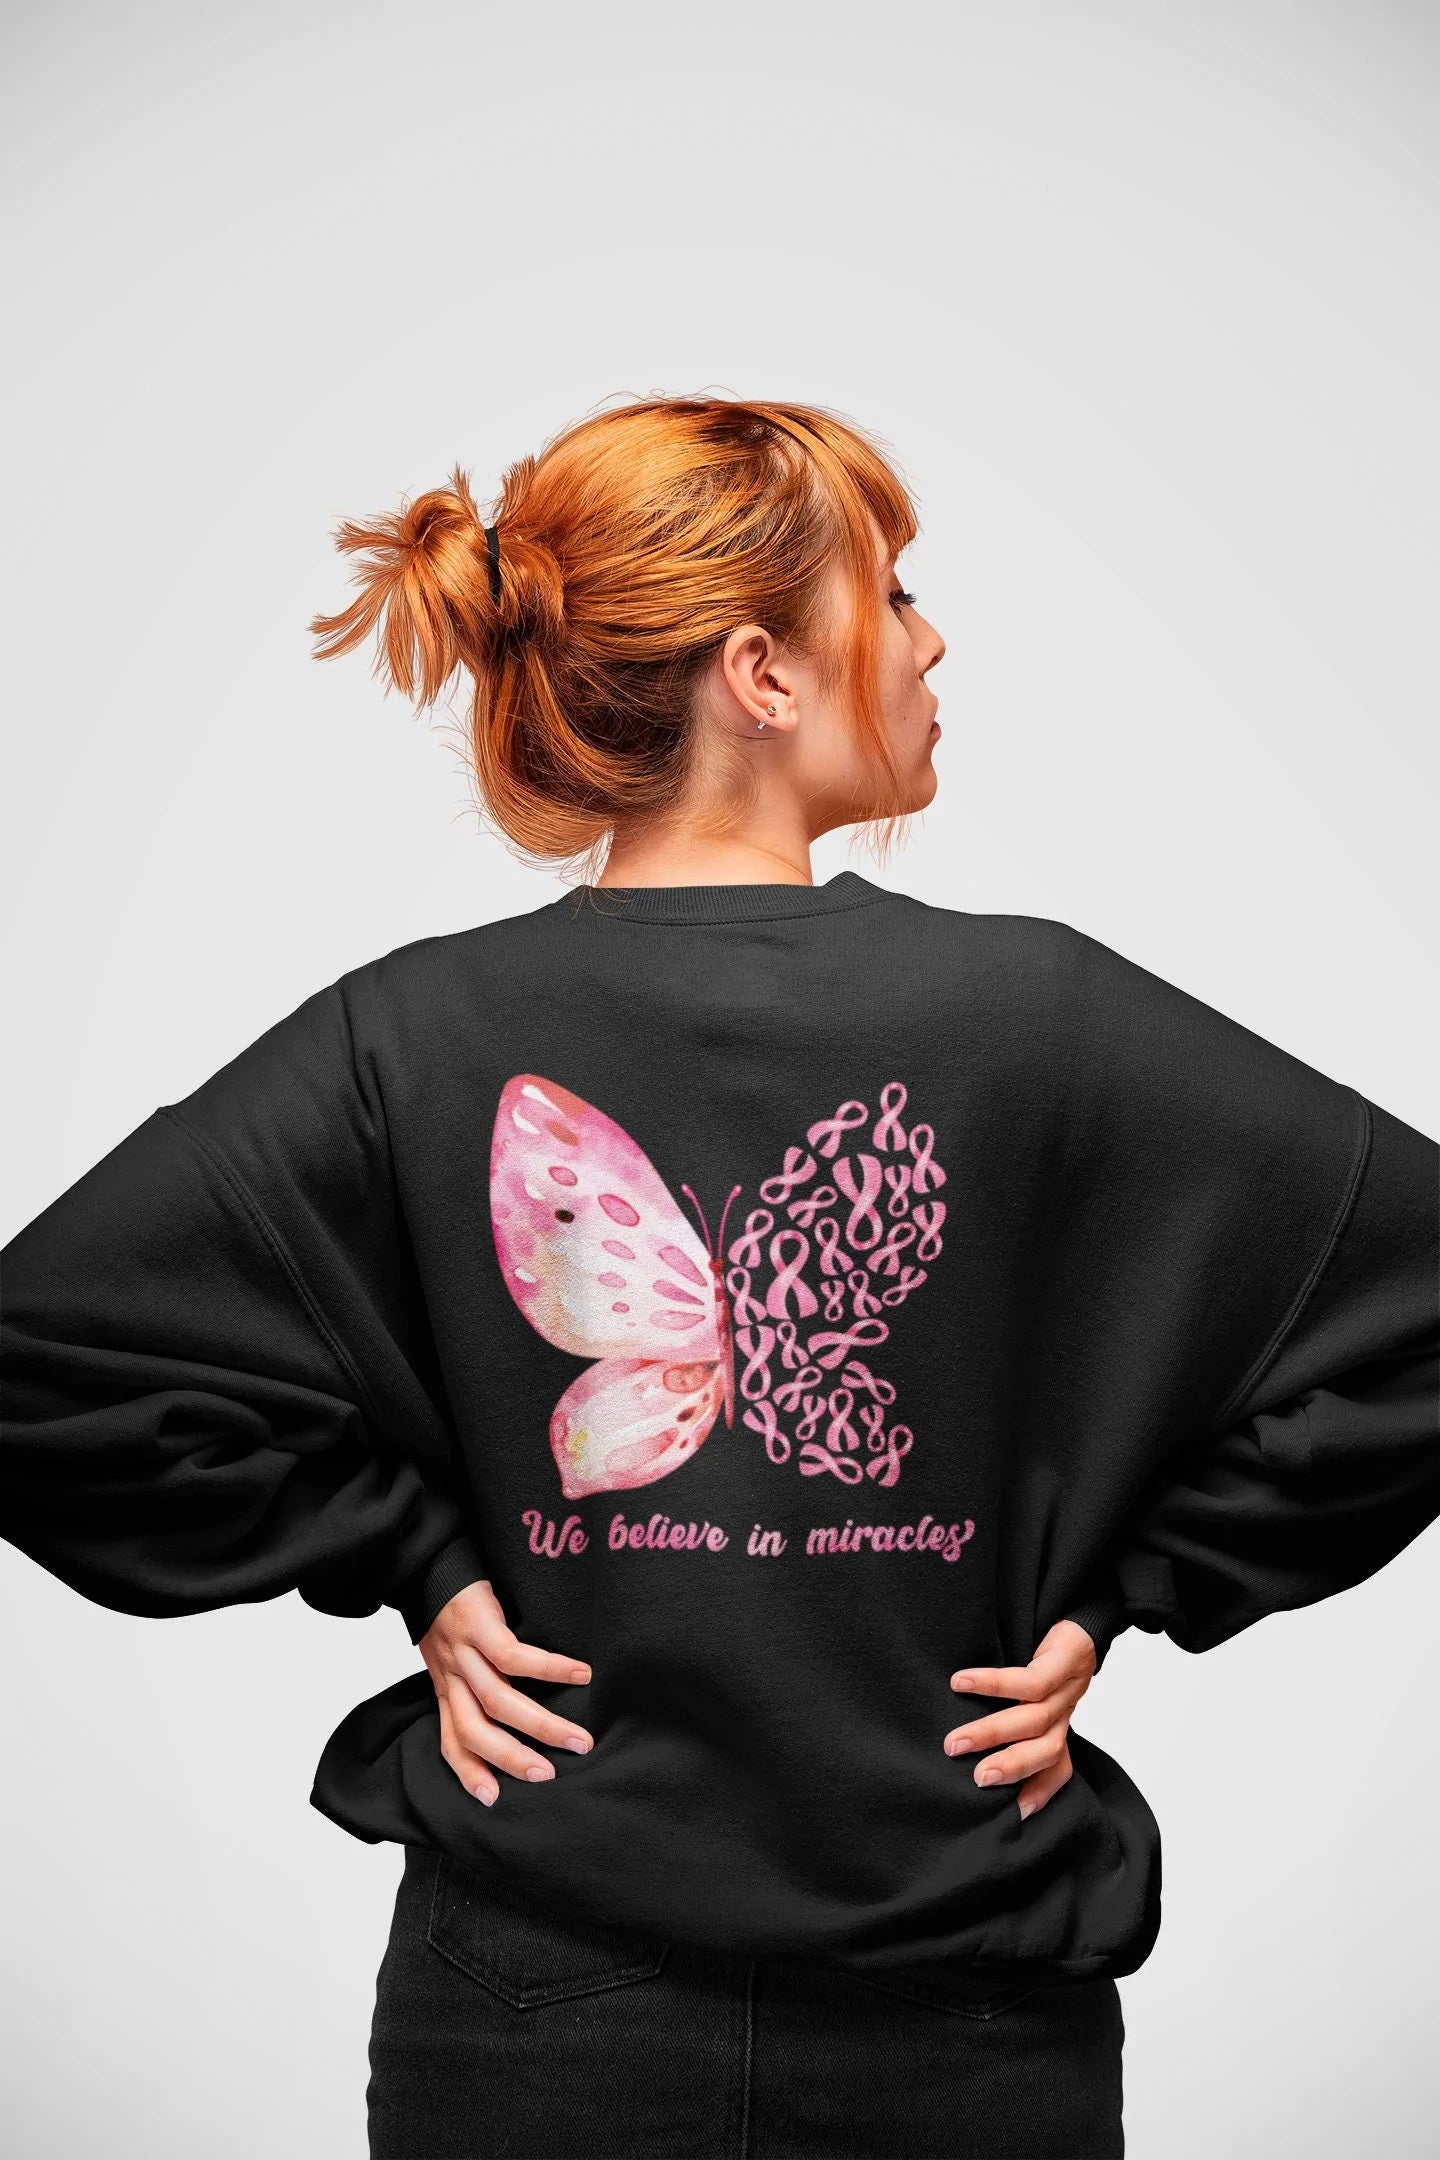 Breast Cancer Shirt, Never Give Up, Cancer Survivor Gifts, Butterfly Sweatshirt, Believe in Miracles, Awareness Month, Pink Ribbon Hoodie